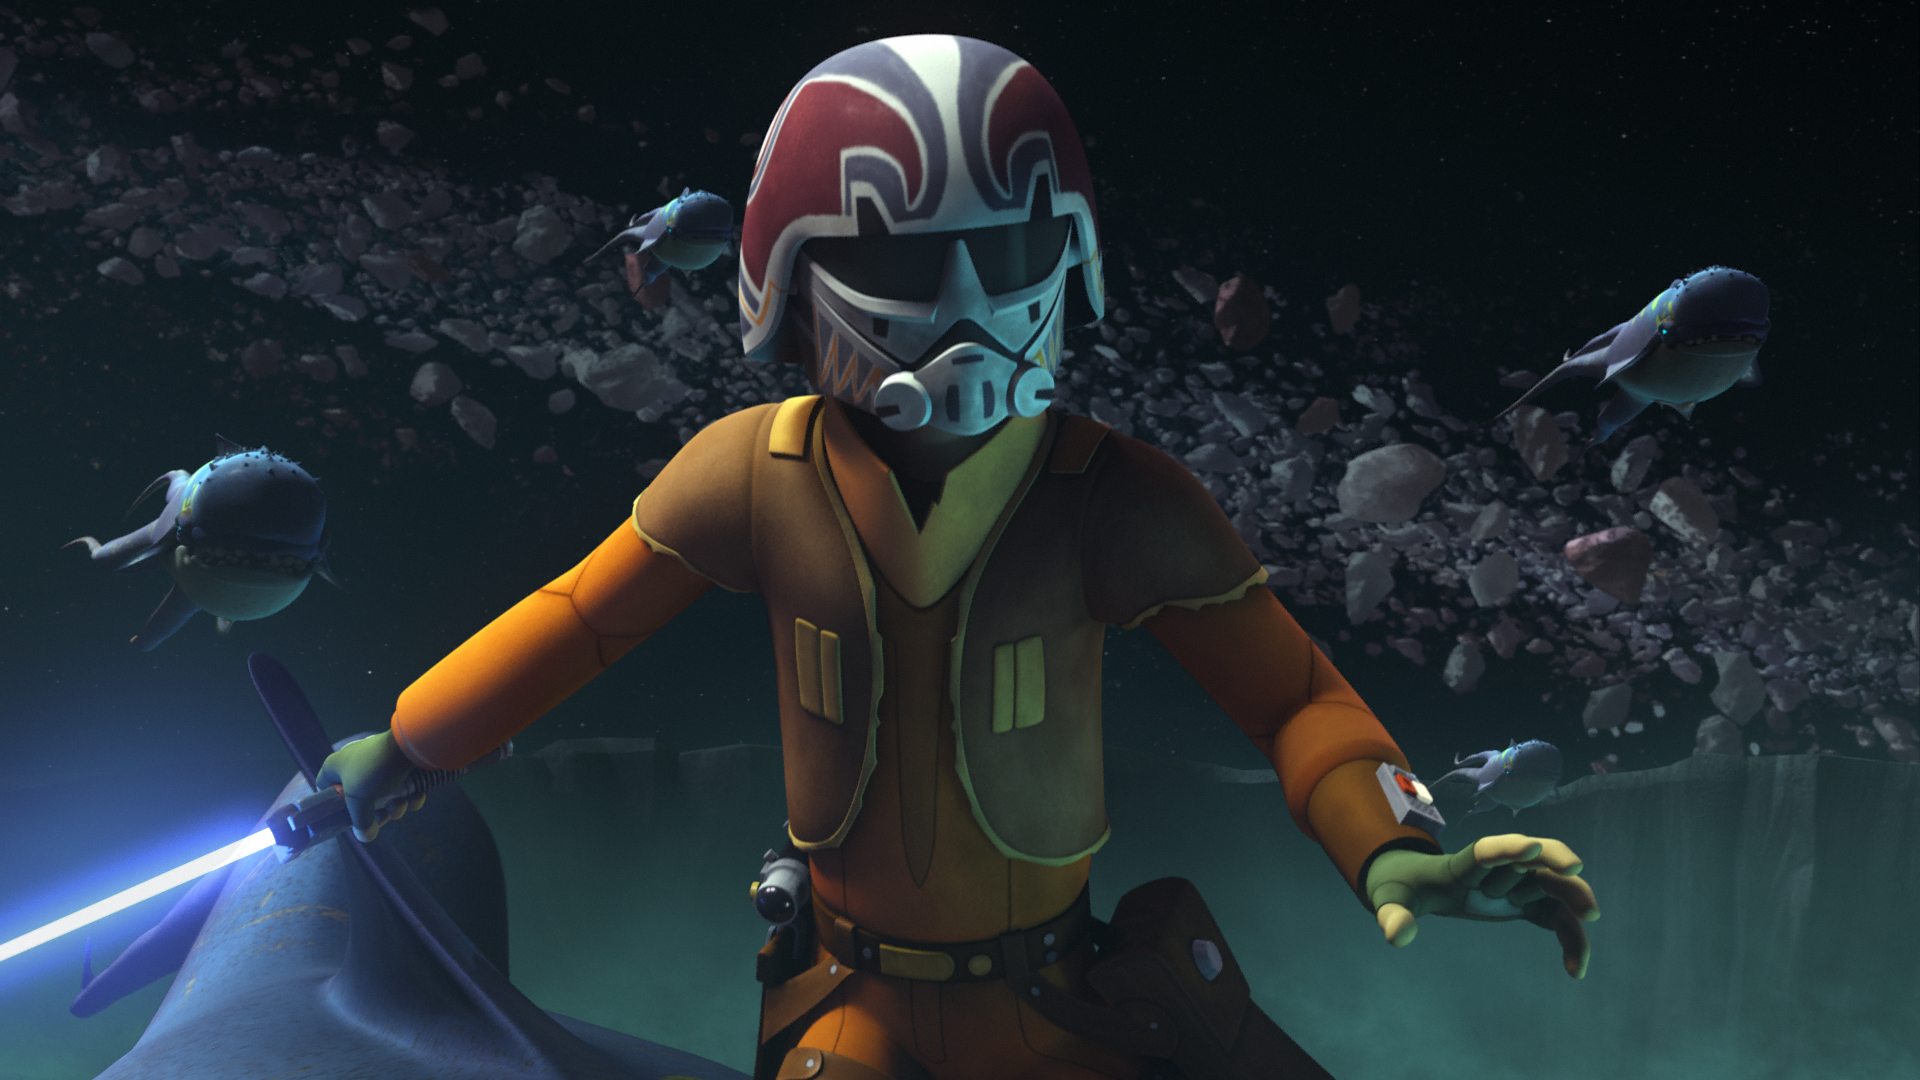 Ezra Answers The Call in This Exclusive 'Star Wars Rebels' Clip